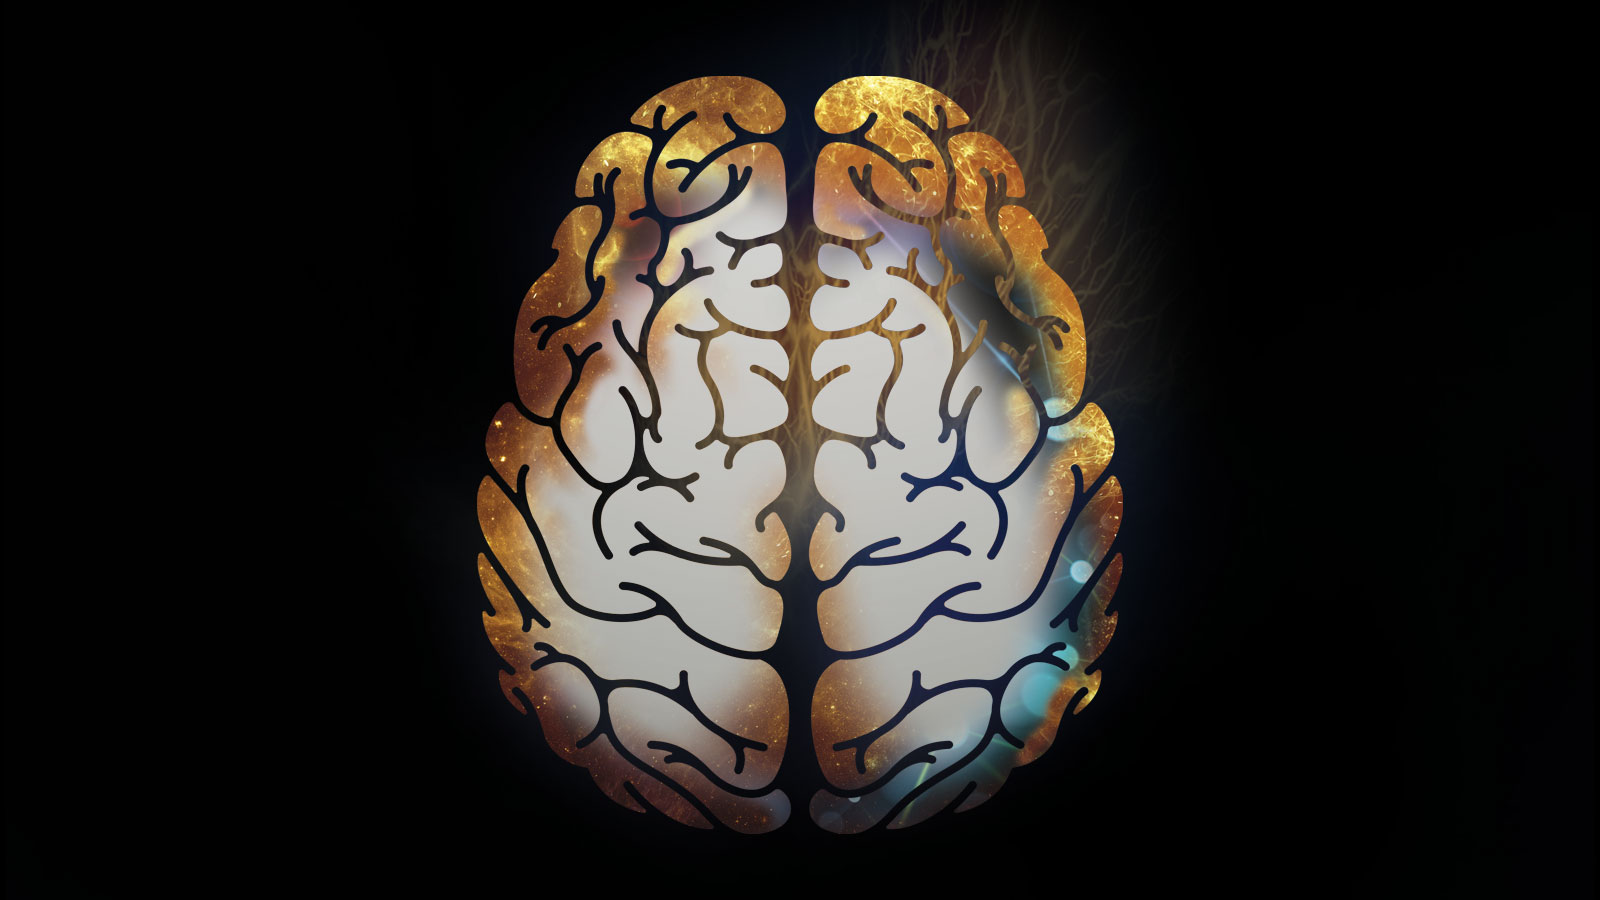 A stylized cross-section of a brain on a black background, representing brain activity and research